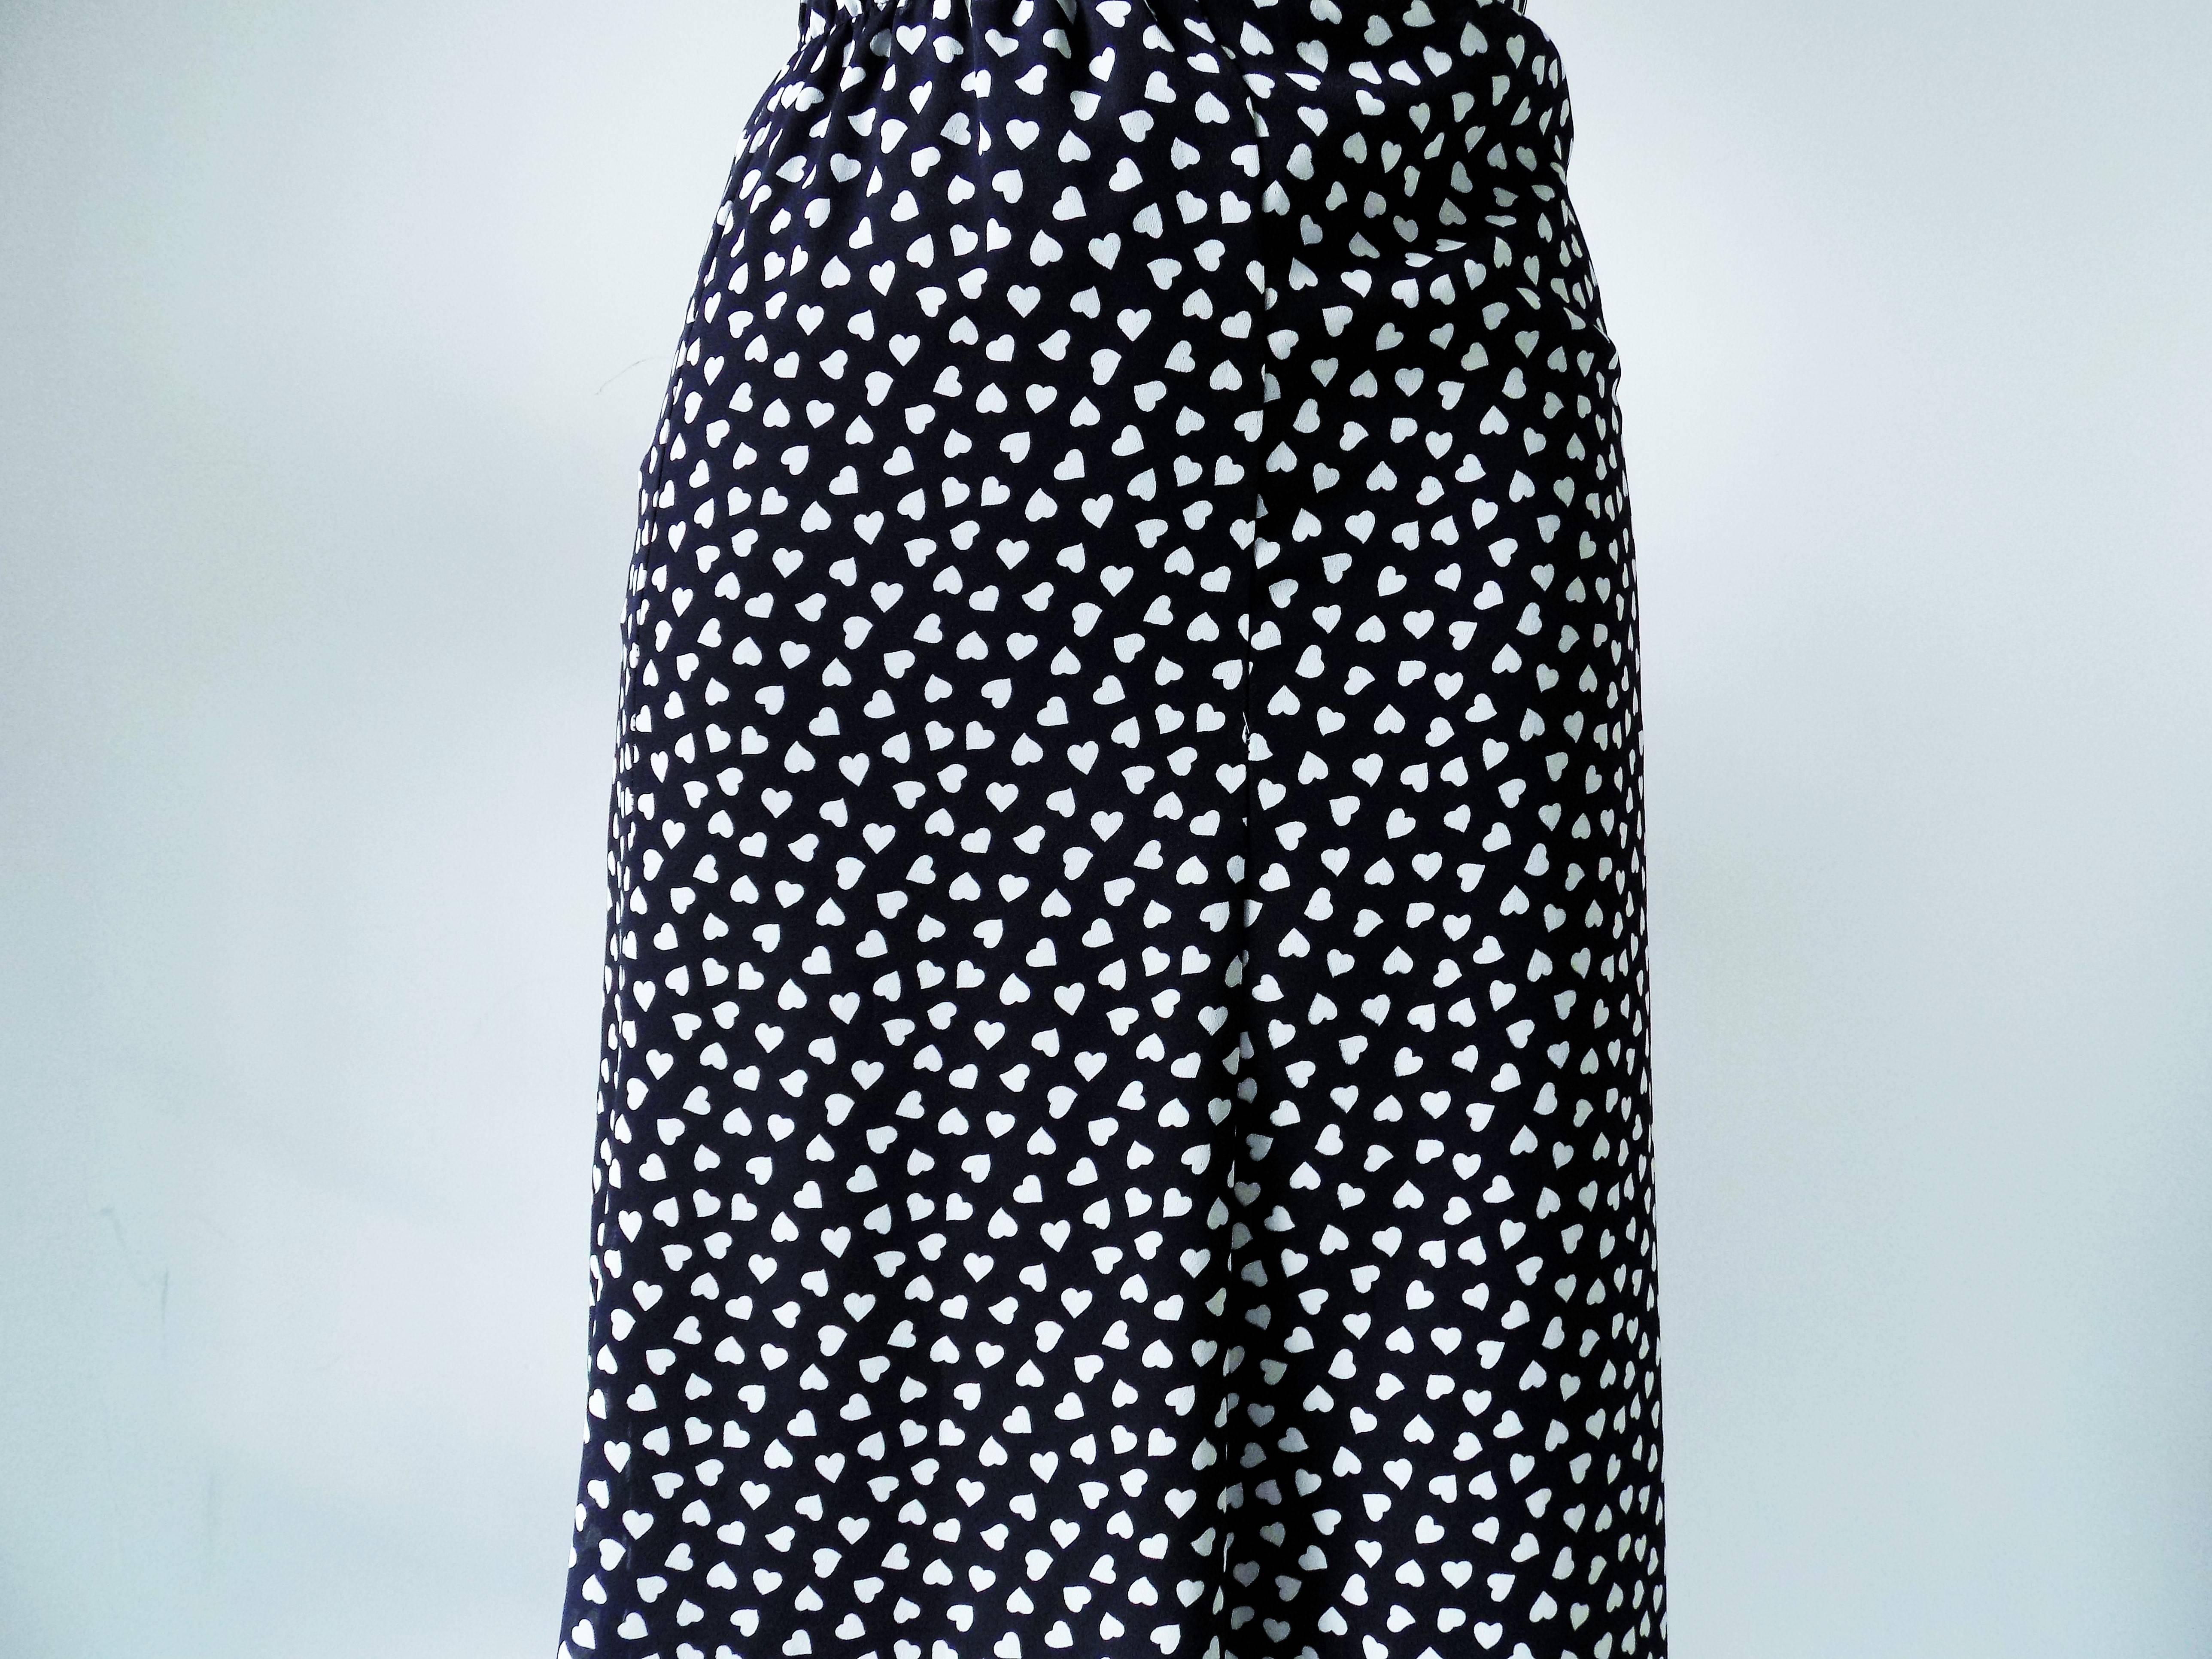 1970s Pierre Cardin Long black skirt with white hearts

Made in france

Size: 48 size range